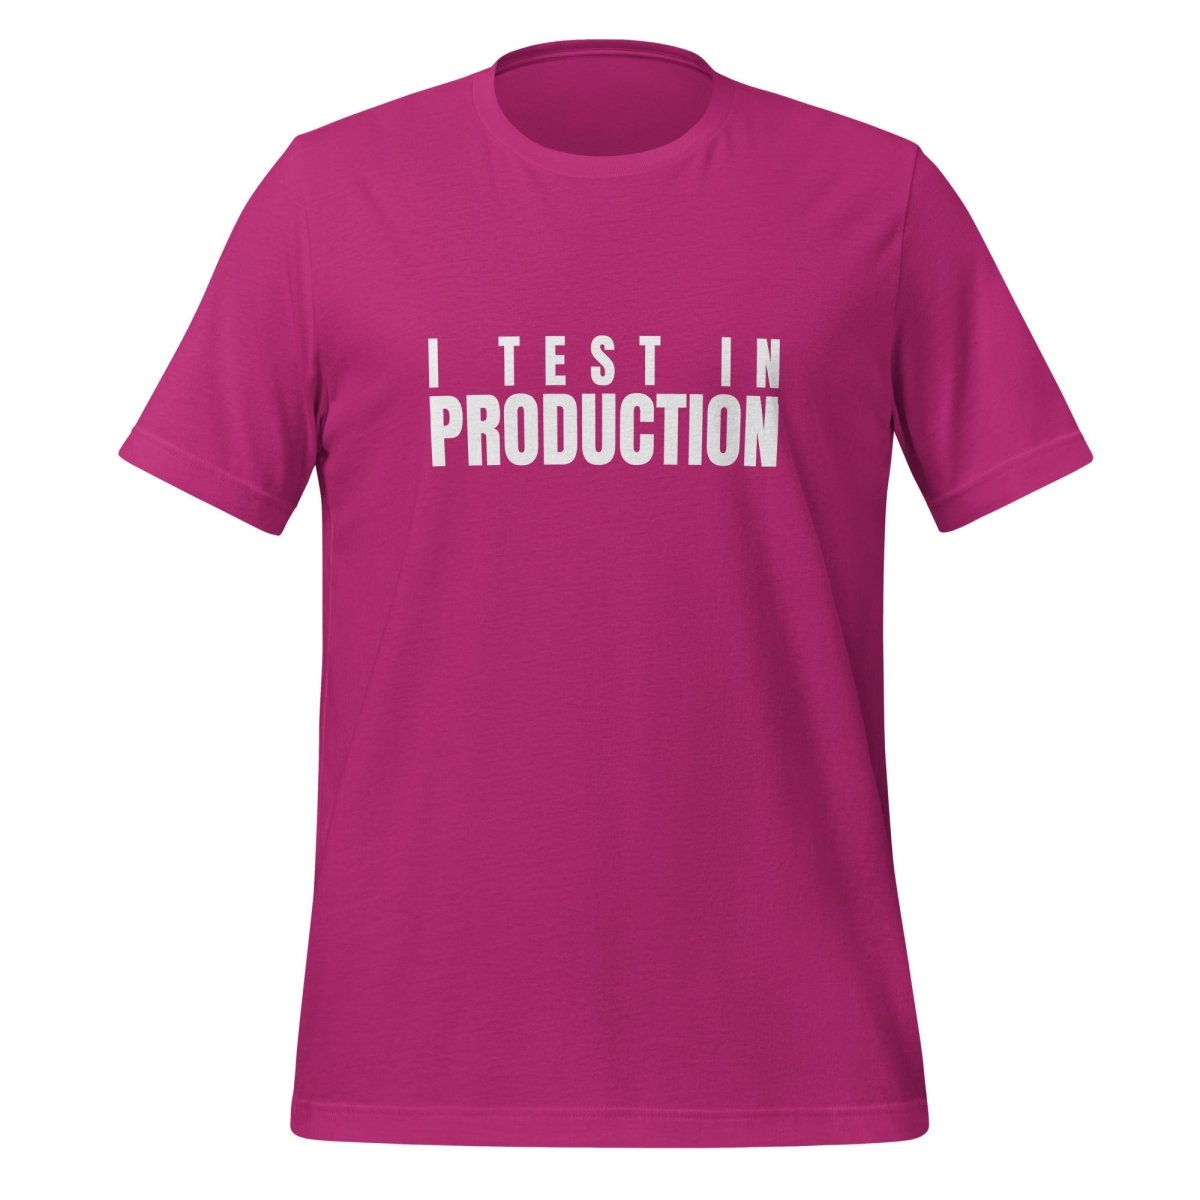 I Test in Production T - Shirt (unisex) - Berry - AI Store